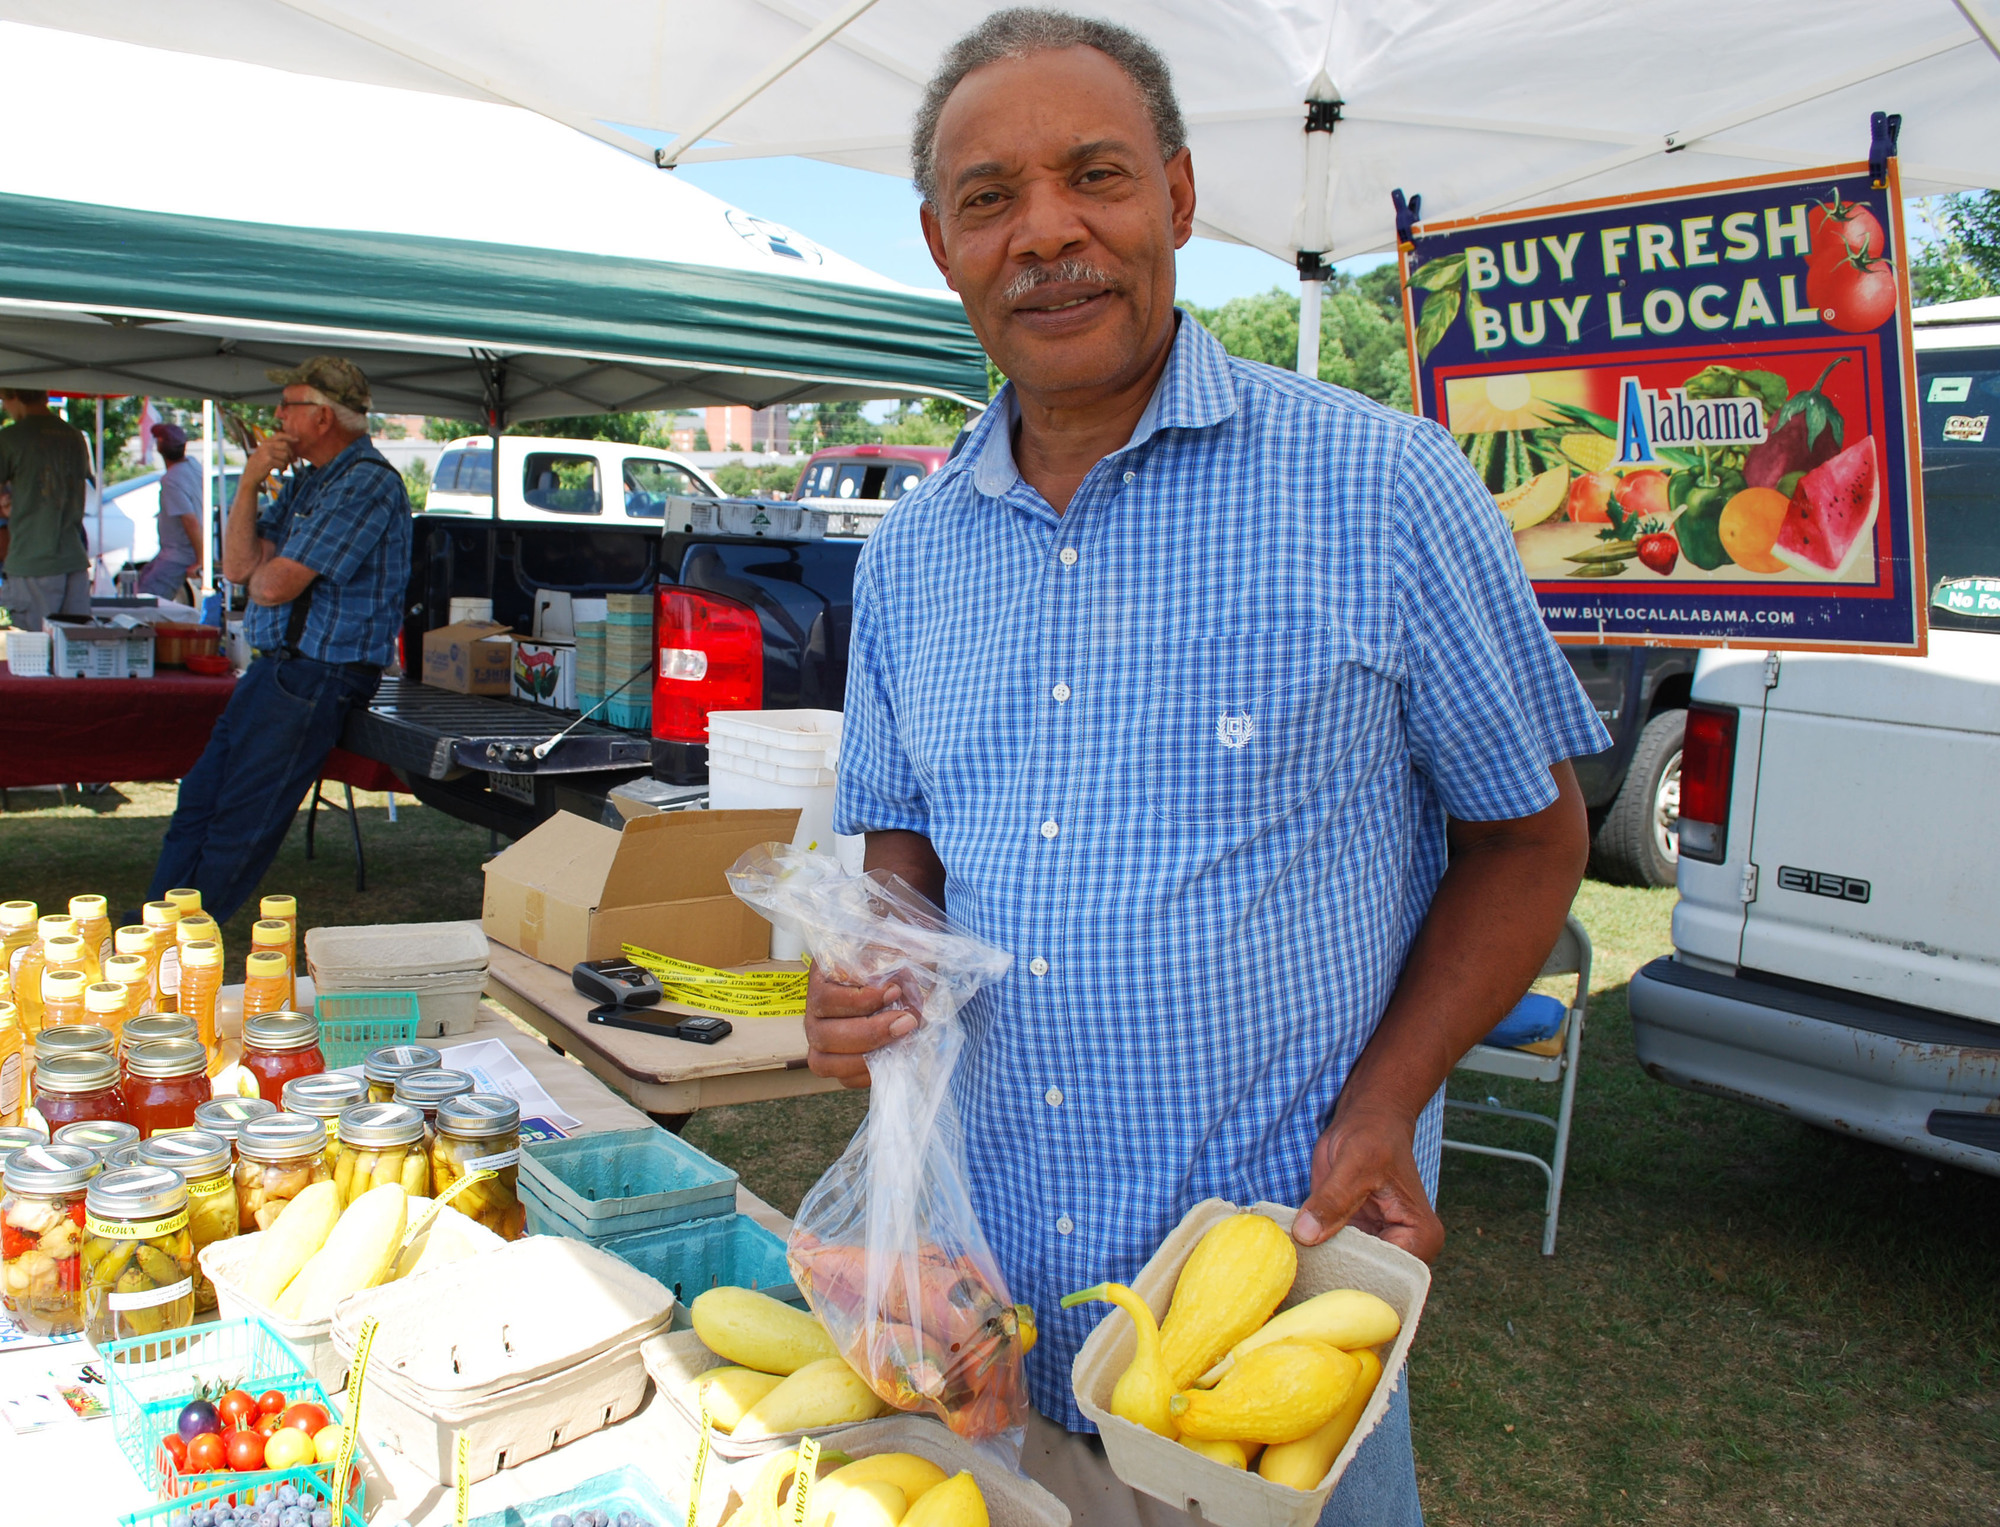 Gene Thornton is a sixth-generation farmer who sells fresh, organic produce at The Market at Ag Heritage Park each week during market season.  